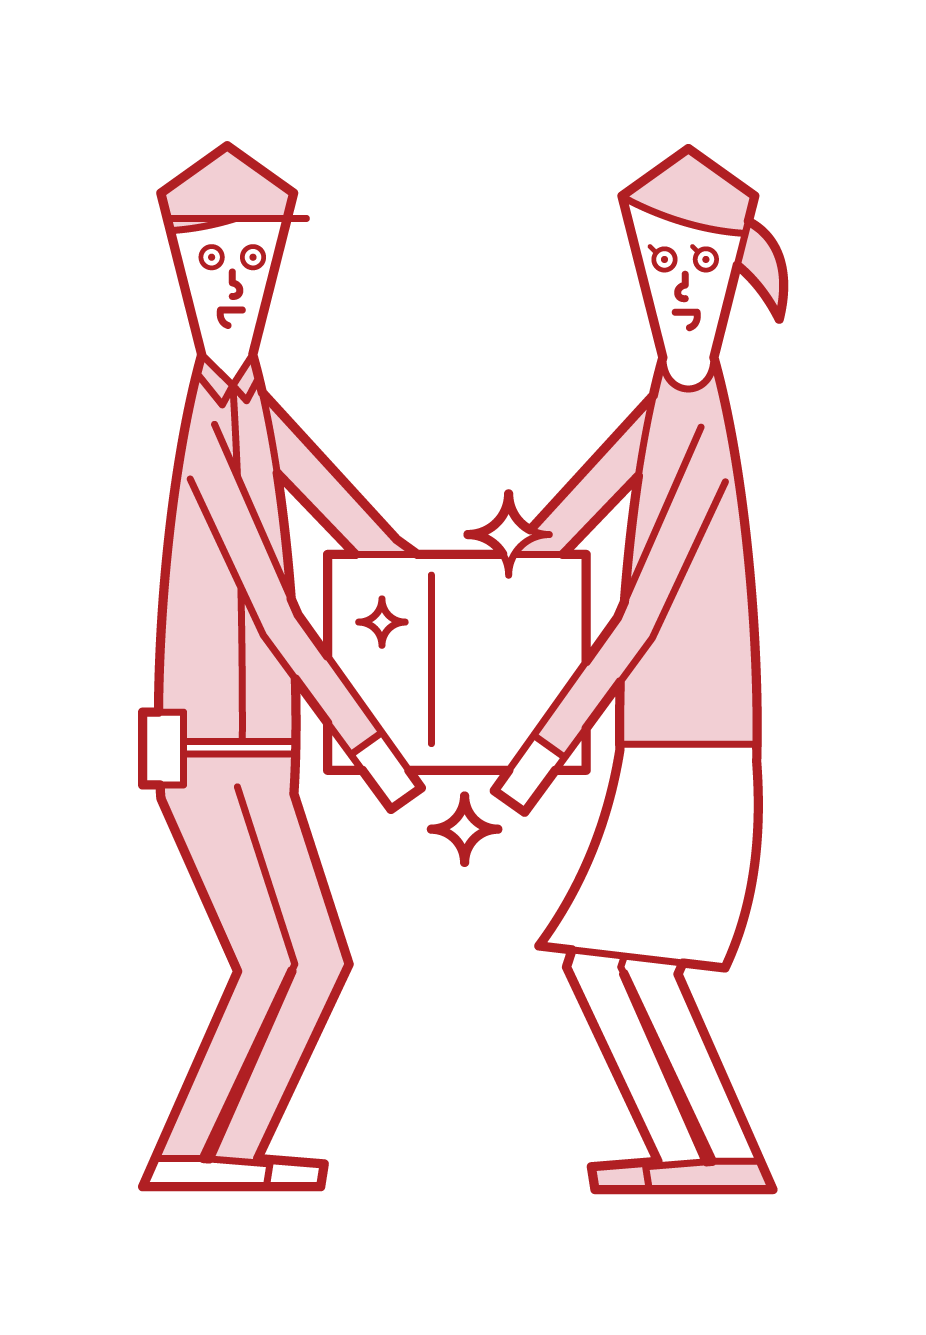 Illustration of a delivery driver (man) handing over a package